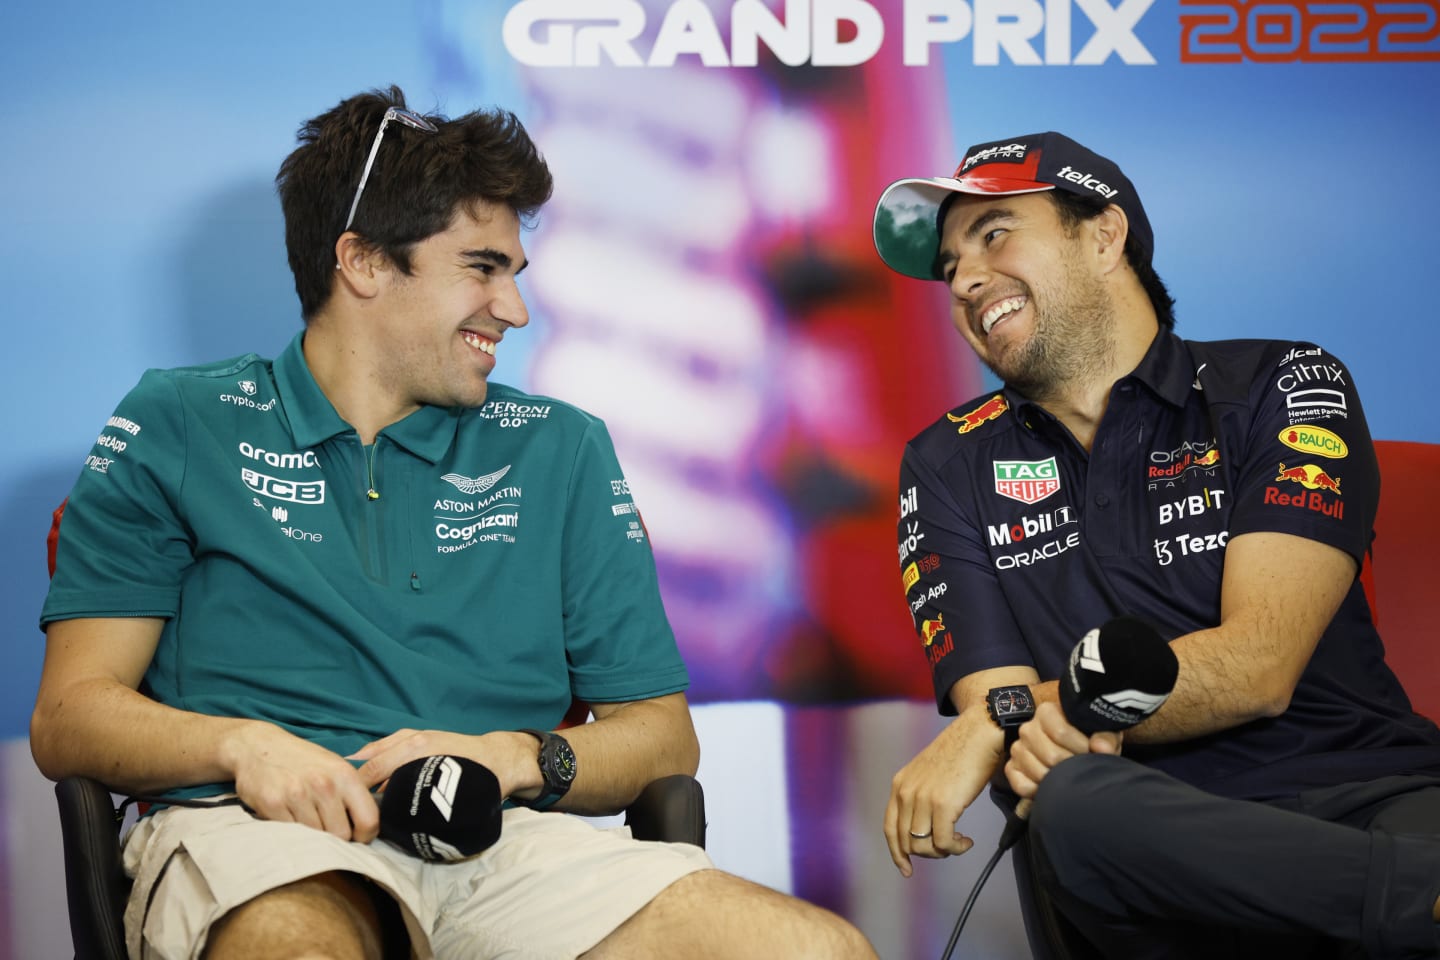 AUSTIN, TEXAS - OCTOBER 20: Lance Stroll of Canada and Aston Martin F1 Team and Sergio Perez of Mexico and Oracle Red Bull Racing talk in the Drivers Press Conference during previews ahead of the F1 Grand Prix of USA at Circuit of The Americas on October 20, 2022 in Austin, Texas. (Photo by Jared C. Tilton/Getty Images)